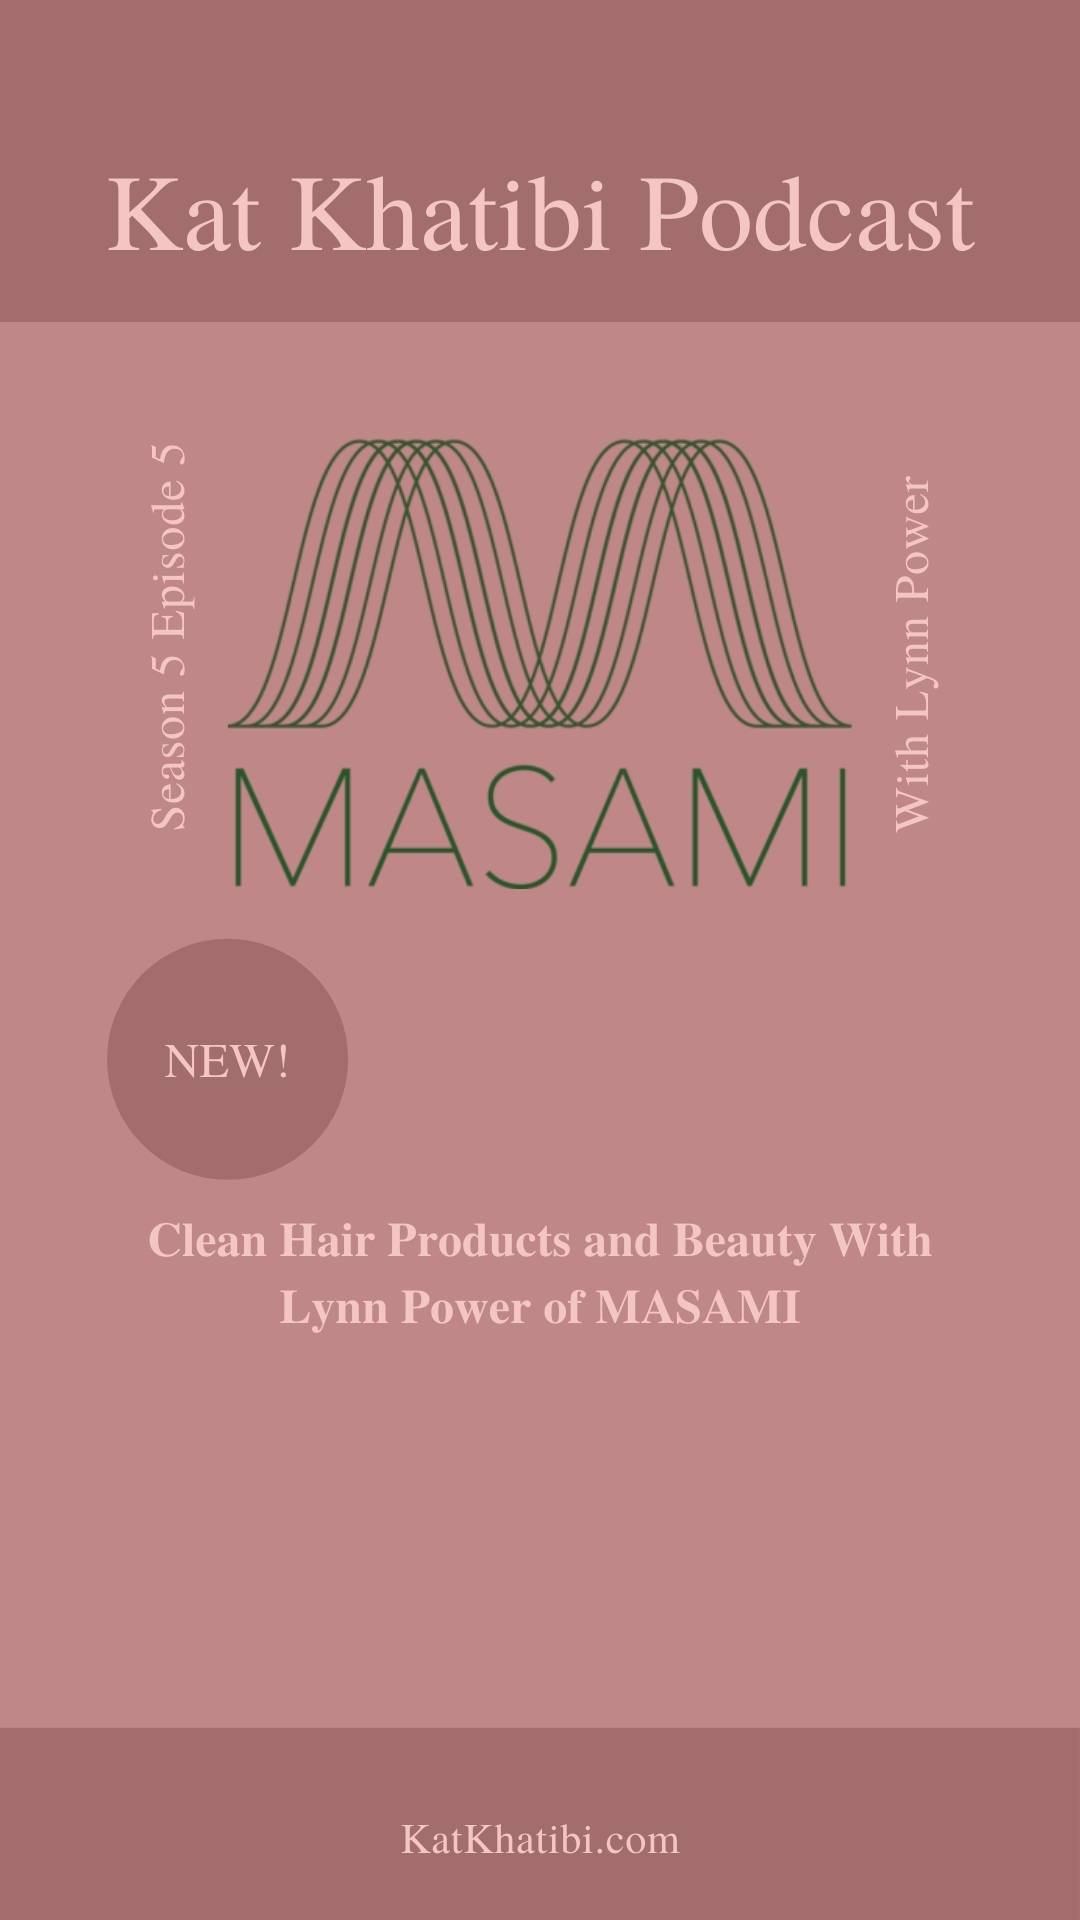 Clean Beauty and Hair Products with Lynn Power of MASAMI